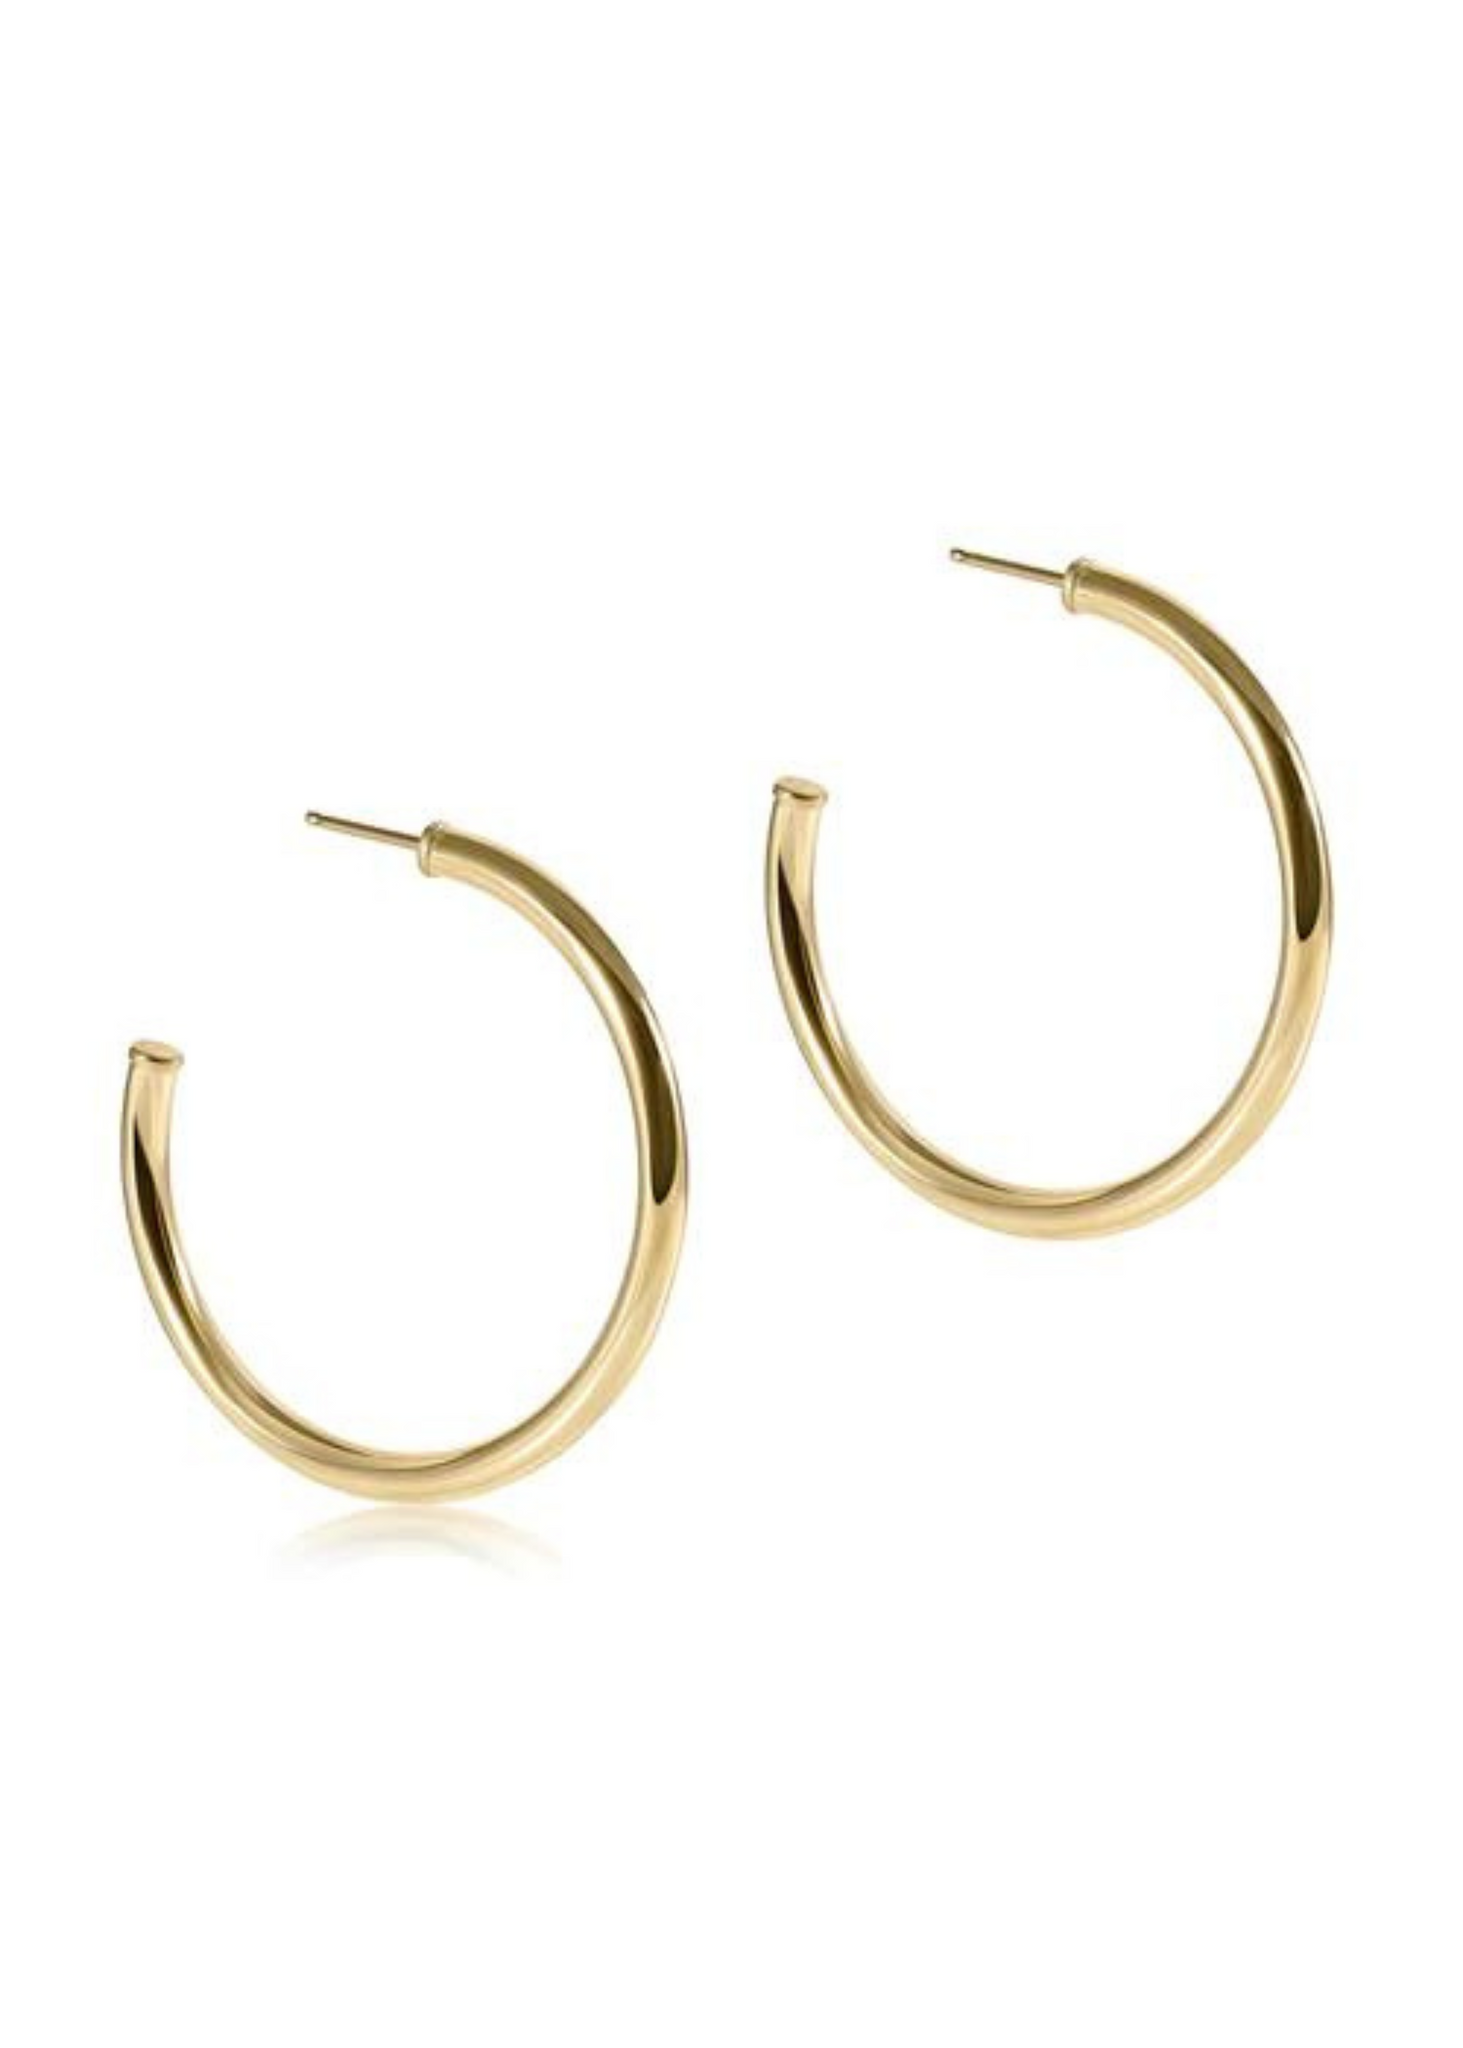 Round Gold 1.5" Post Hoop 3mm-Smooth